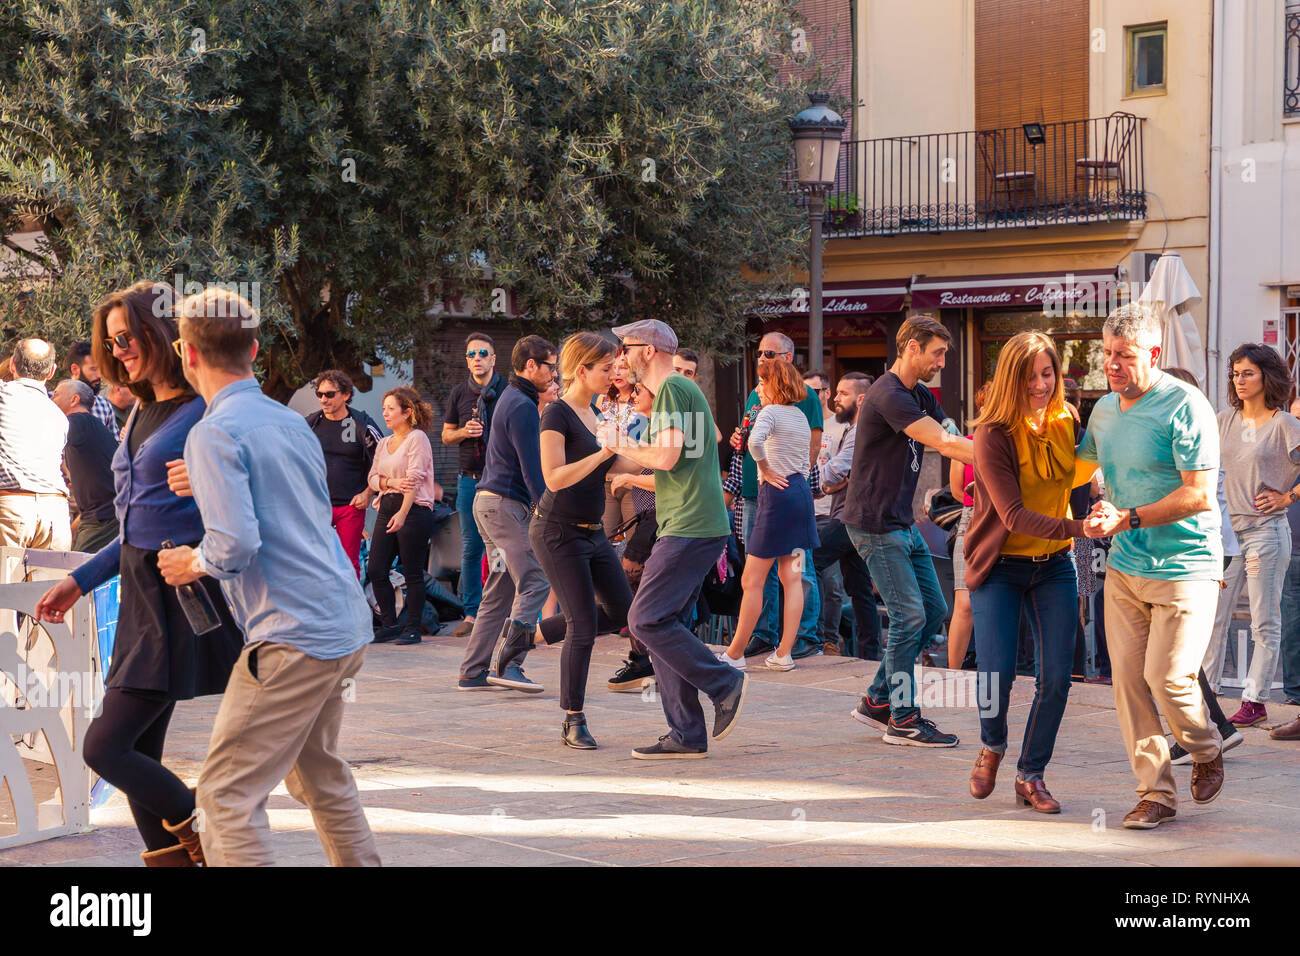 Valencia, Spain; December 2 2018: People dancing on the street during holiday. Young stylish couple dance. Having a good time. Stock Photo